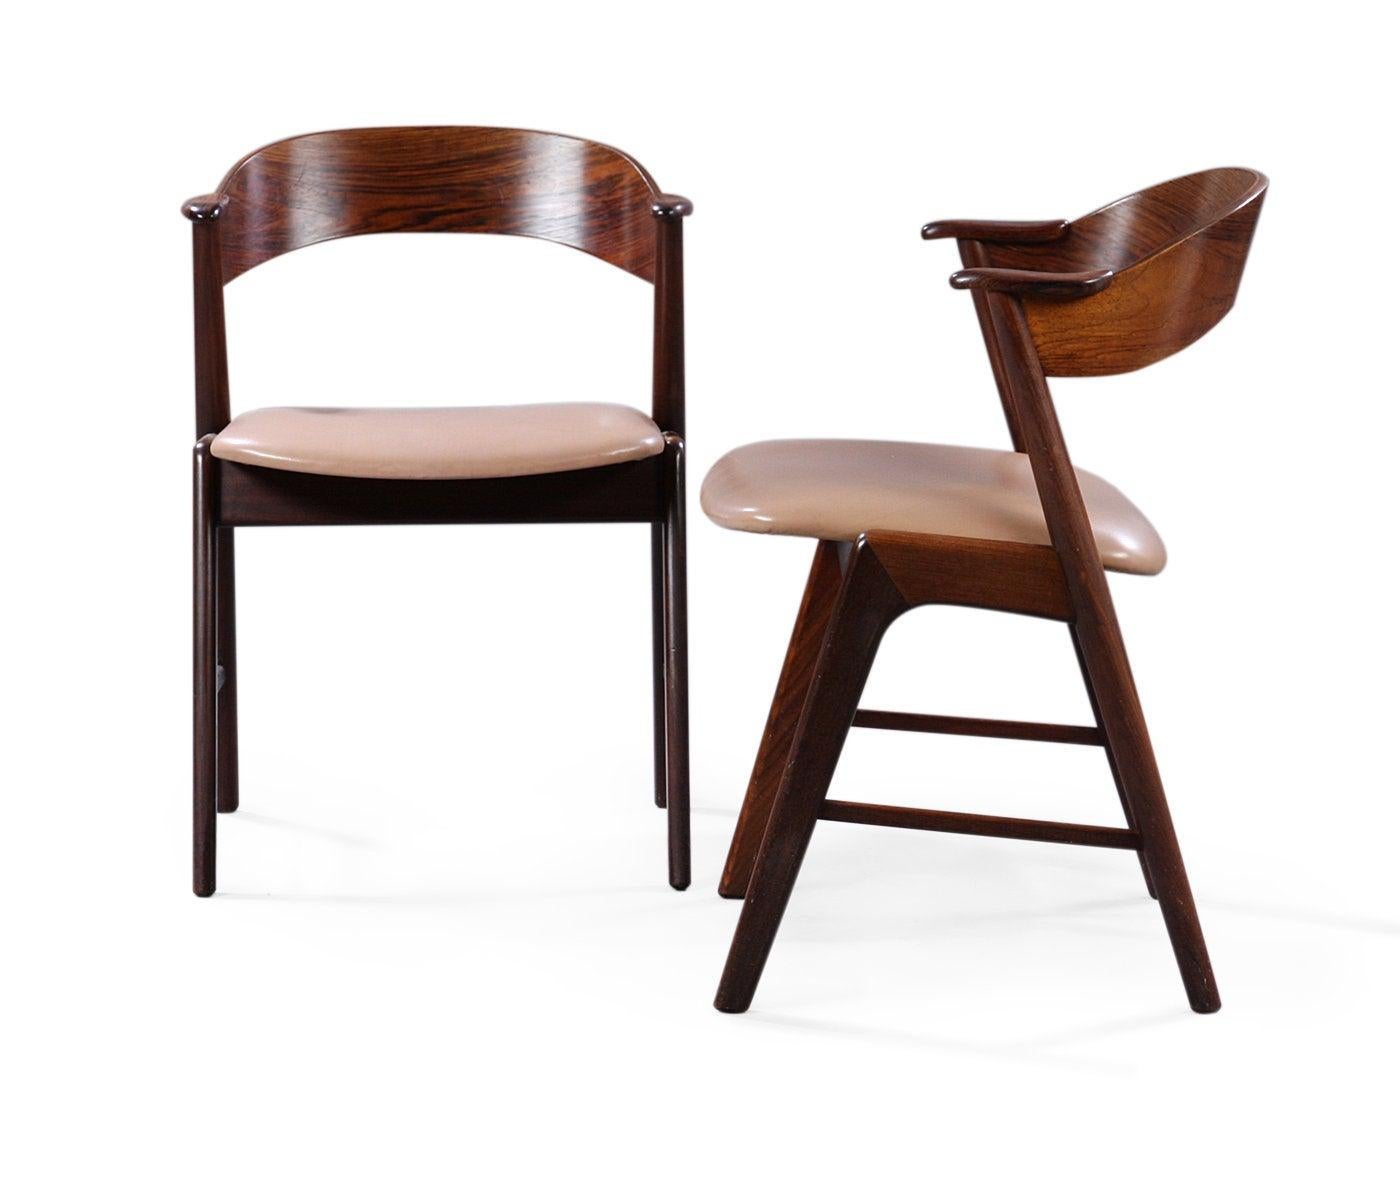 Gorgeous set of 4 vintage rosewood dining chairs with upholstered beige leather seats. Mid-Century Modern, circa 1960.
The curved backrests and small elbow-rests are flowing into the elegant frame design.
A high quality design set that mixes